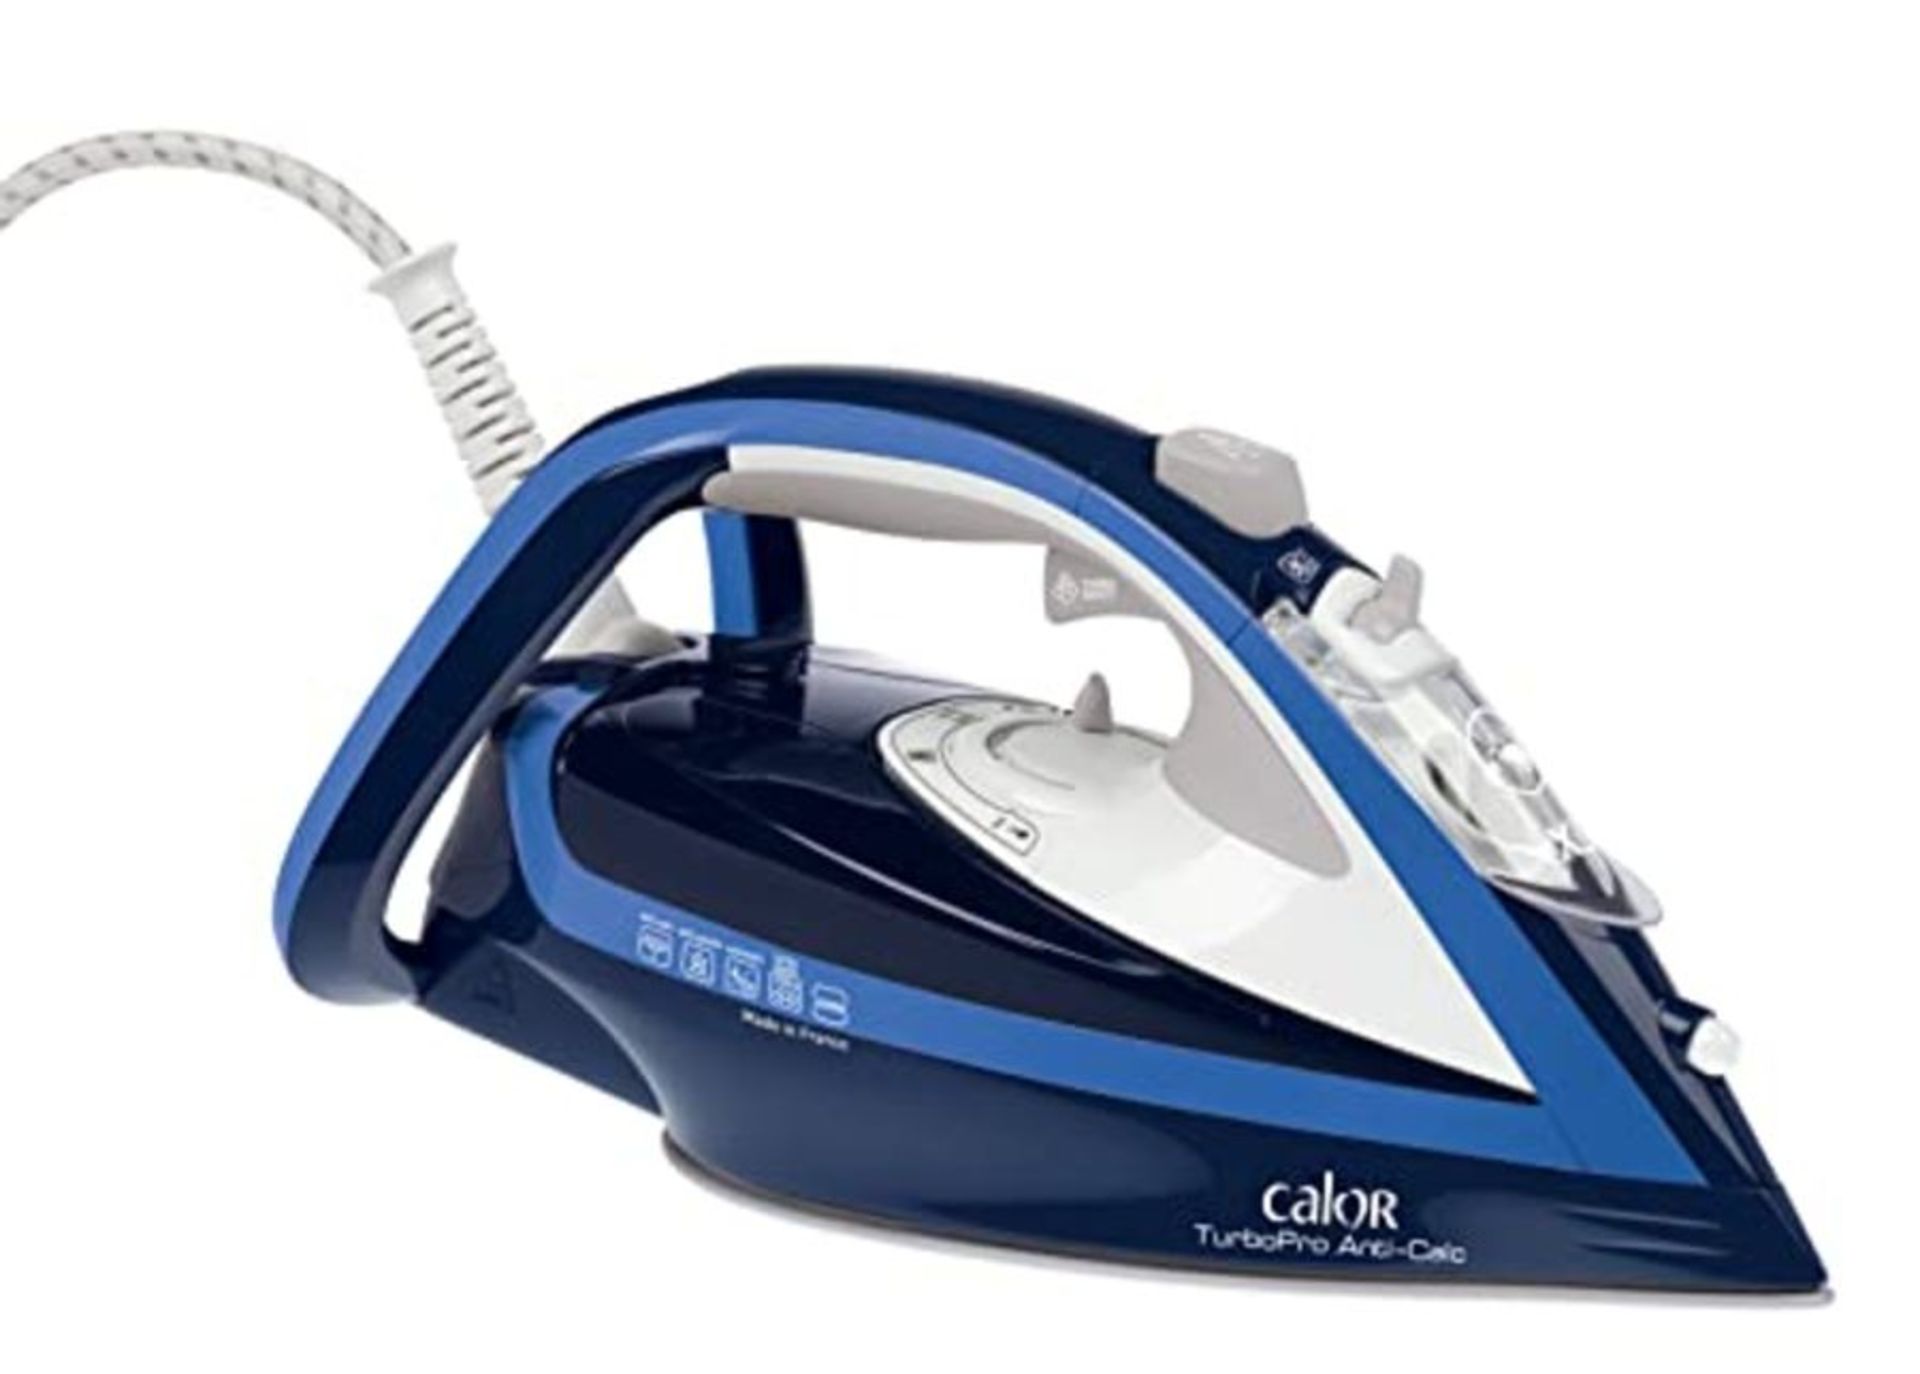 RRP £67.00 Calor Turbo Steam Iron Anti-Calc 2600 W Function Turbo Boost 200 g/min with Collector